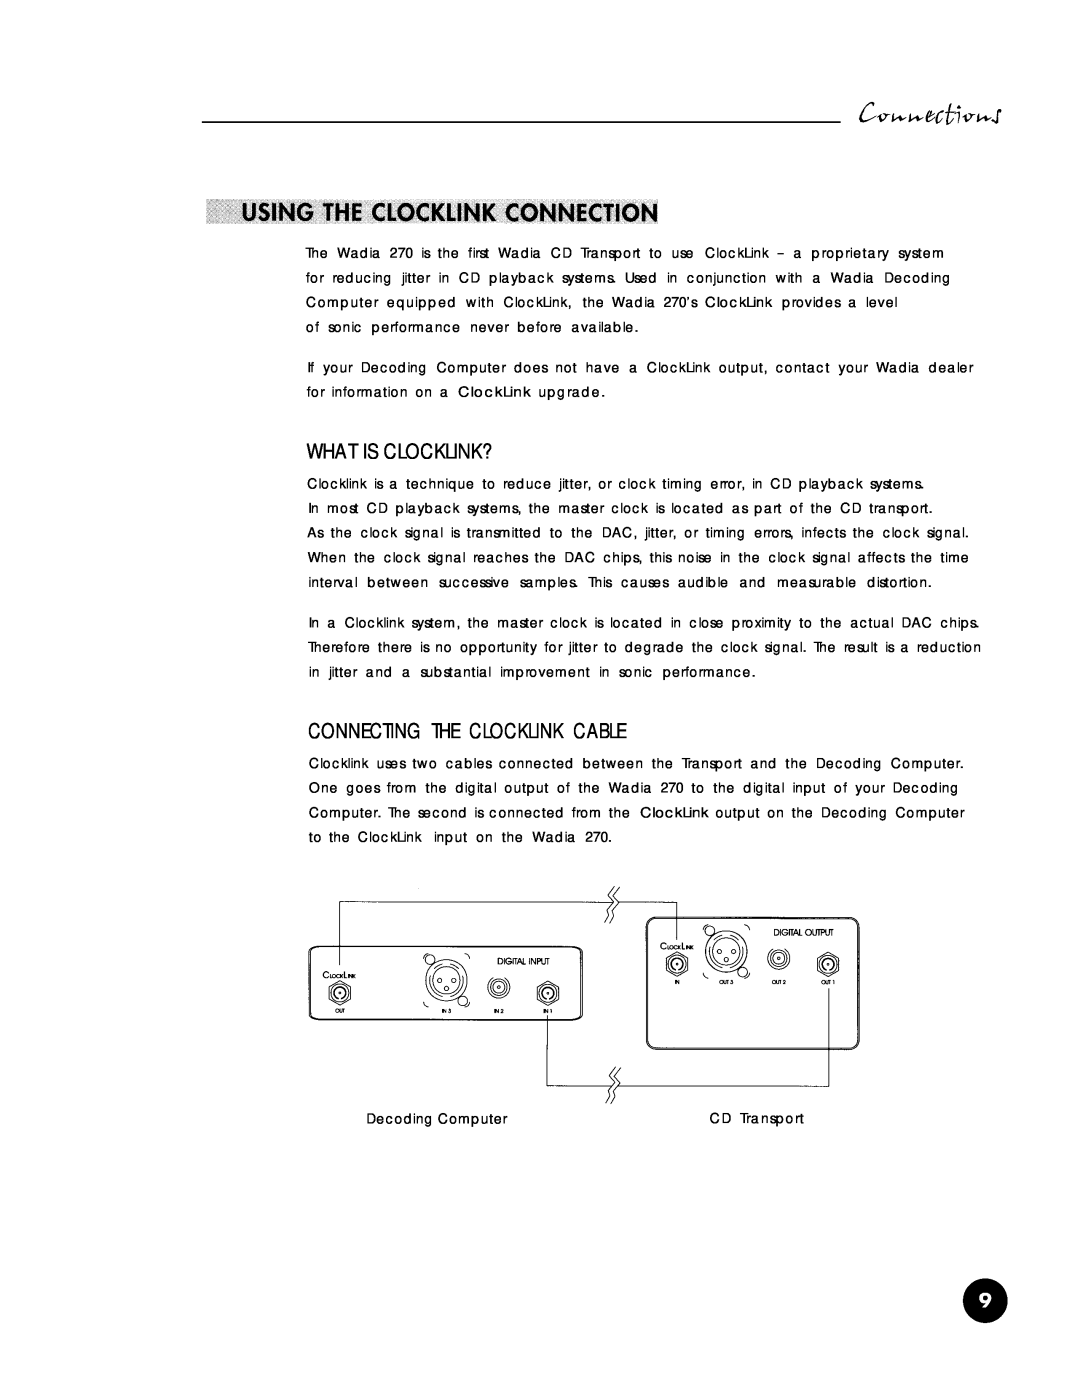 Wadia Digital 270 operation manual What Is Clocklink?, Connecting The Clocklink Cable 